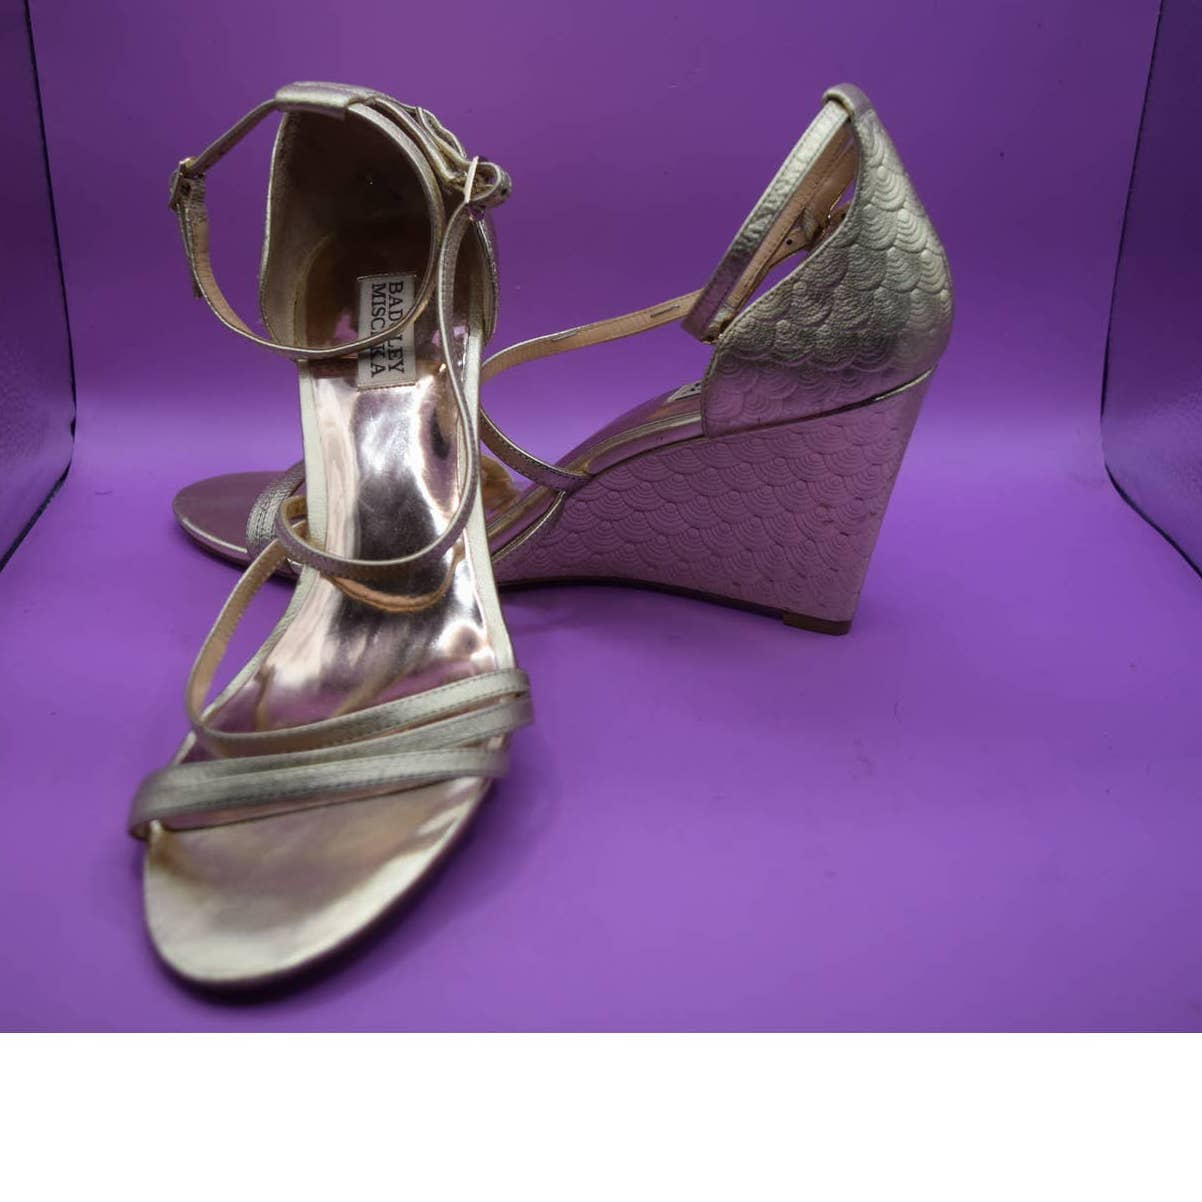 Badgley Mischka Gold Scalloped Wedge Heel Strappy Shoes - 10